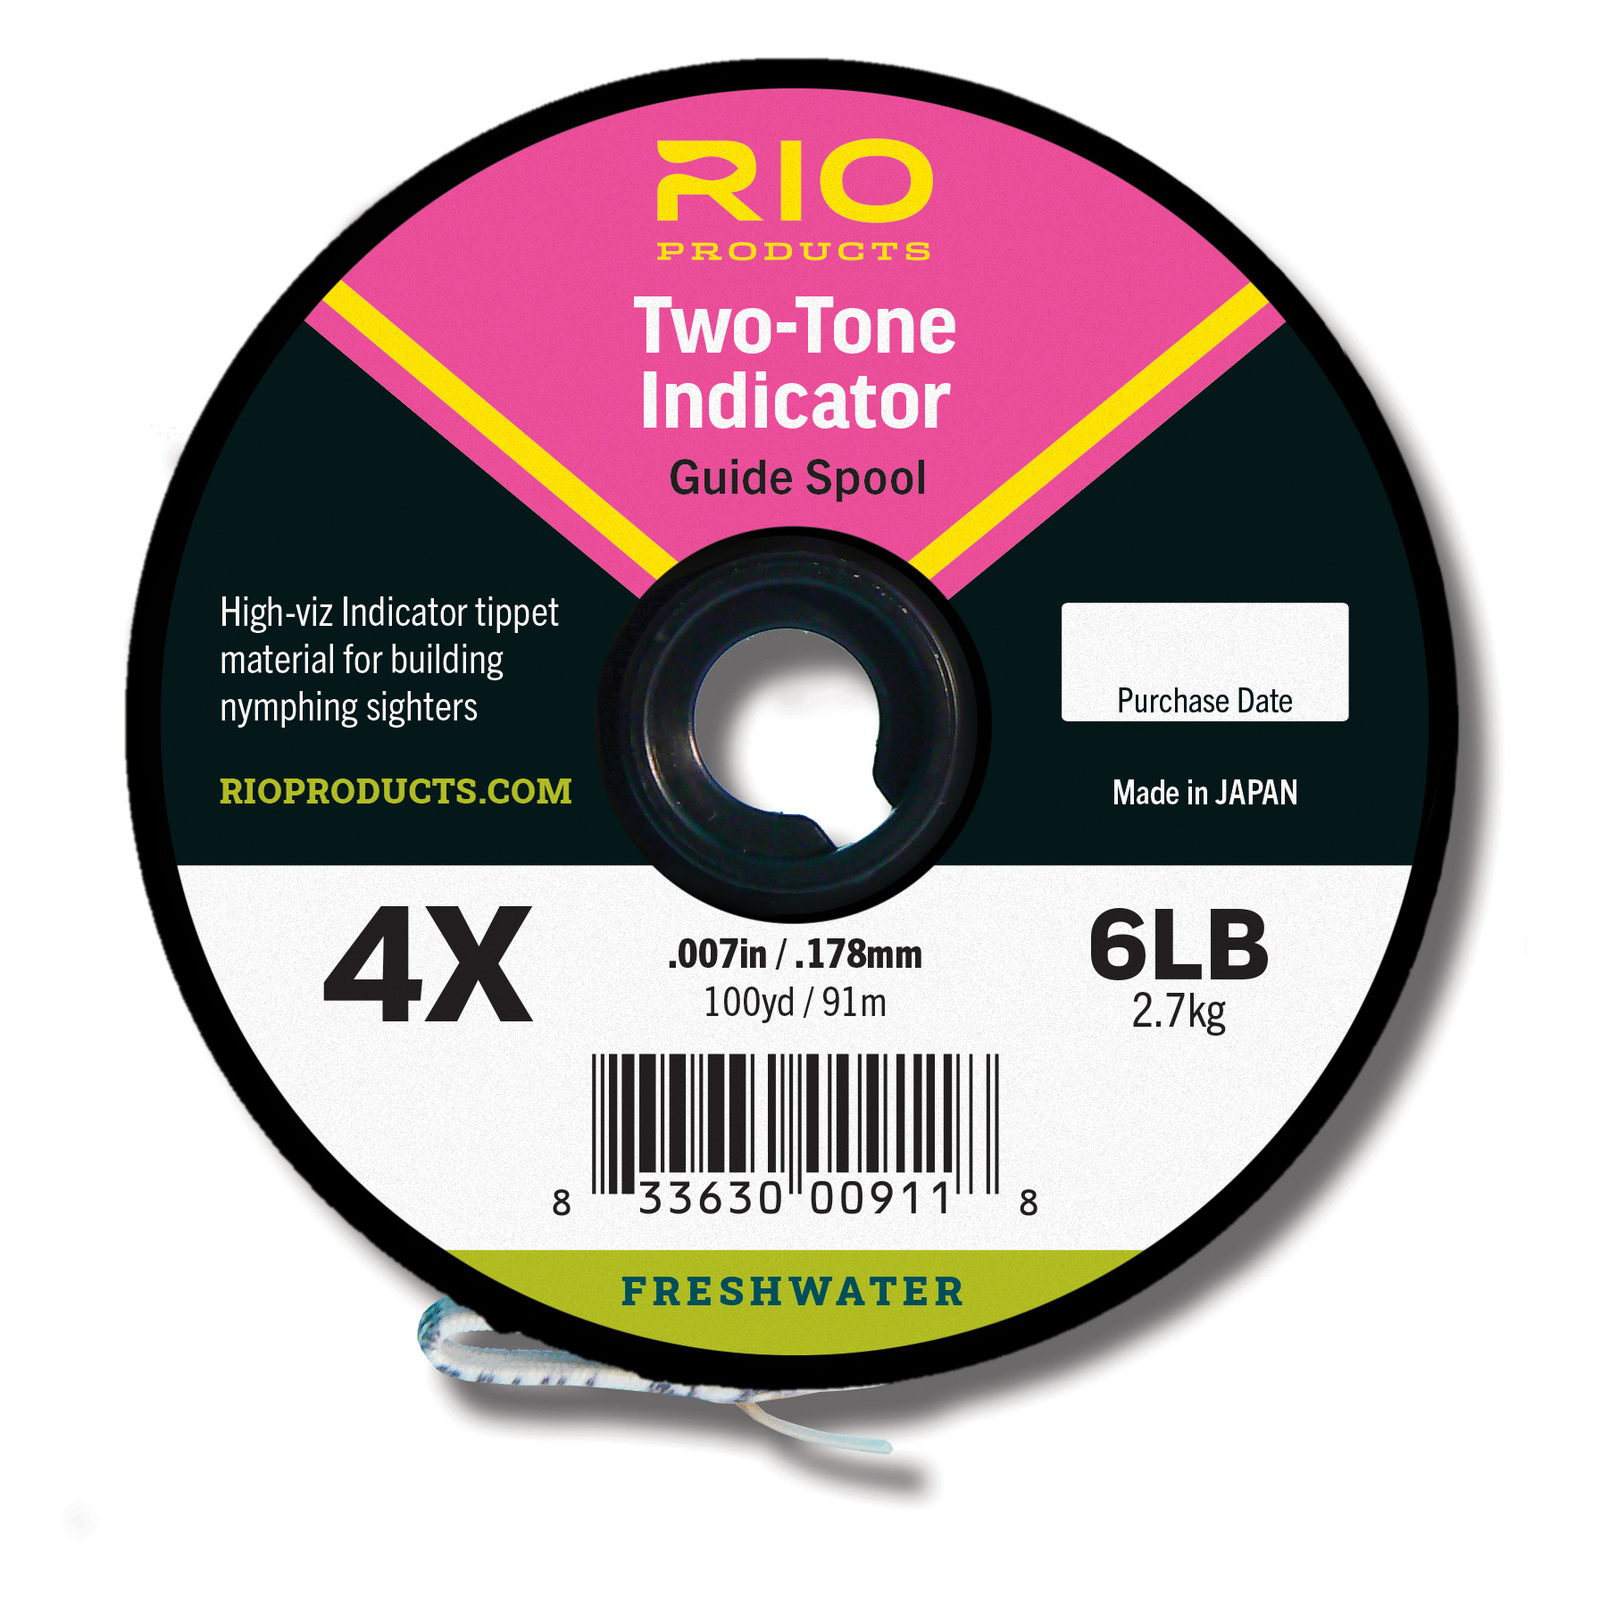 RIO 2-Tone Indicator Tippet  Buy RIO Euro Nymphing Tippet Online